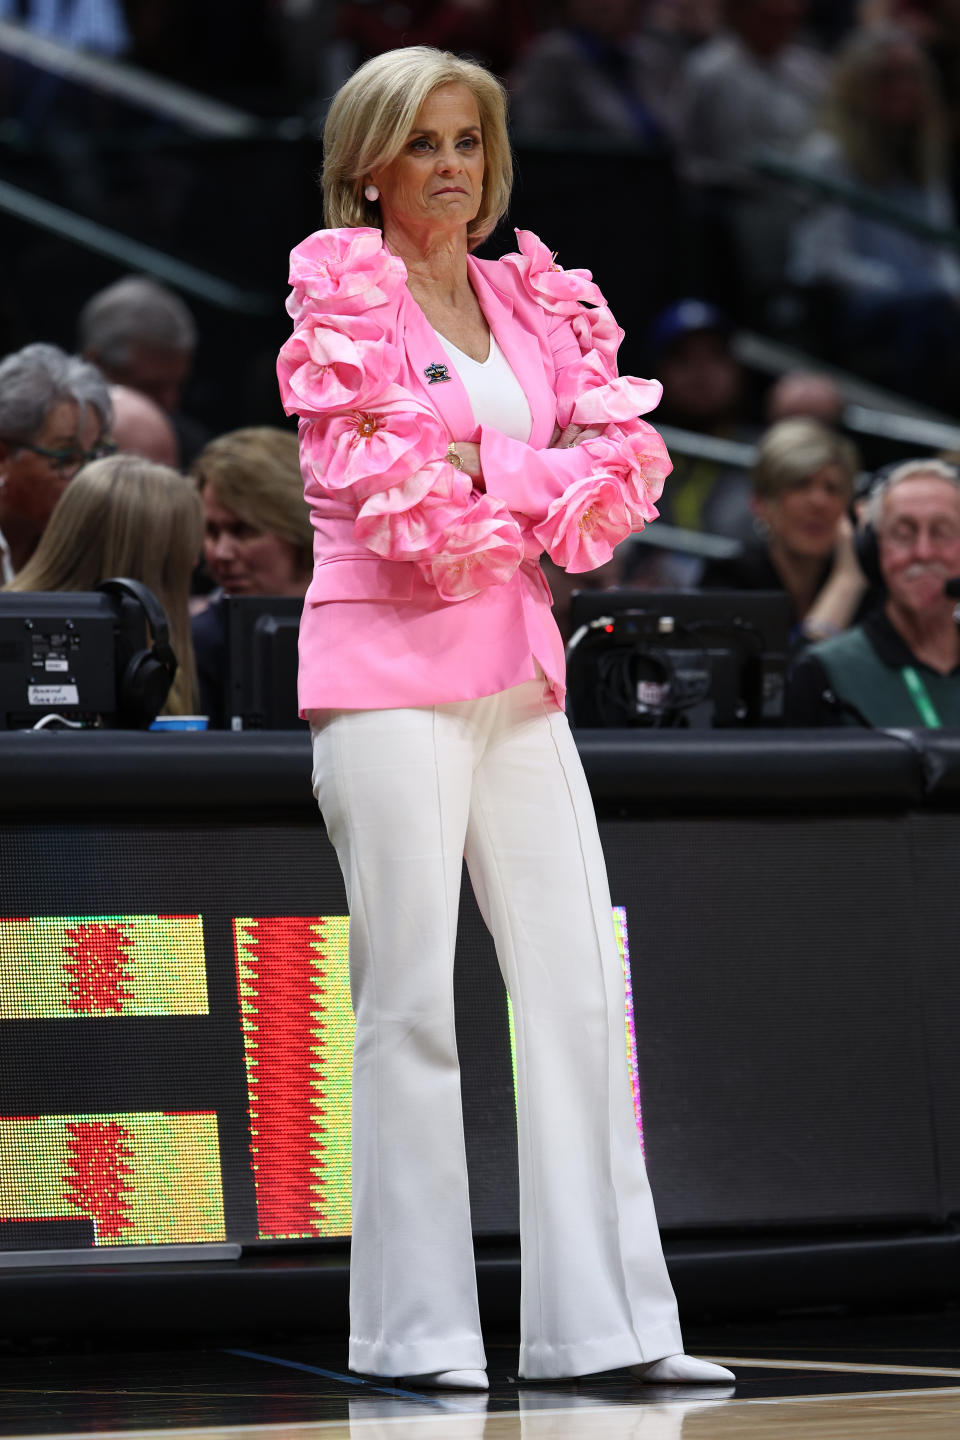 Head coach Kim Mulkey of the LSU Lady Tigers is seen during the first half against the Virginia Tech Hokies during the 2023 NCAA Women’s Basketball Tournament Final Four semifinal game. - Credit: Getty Images